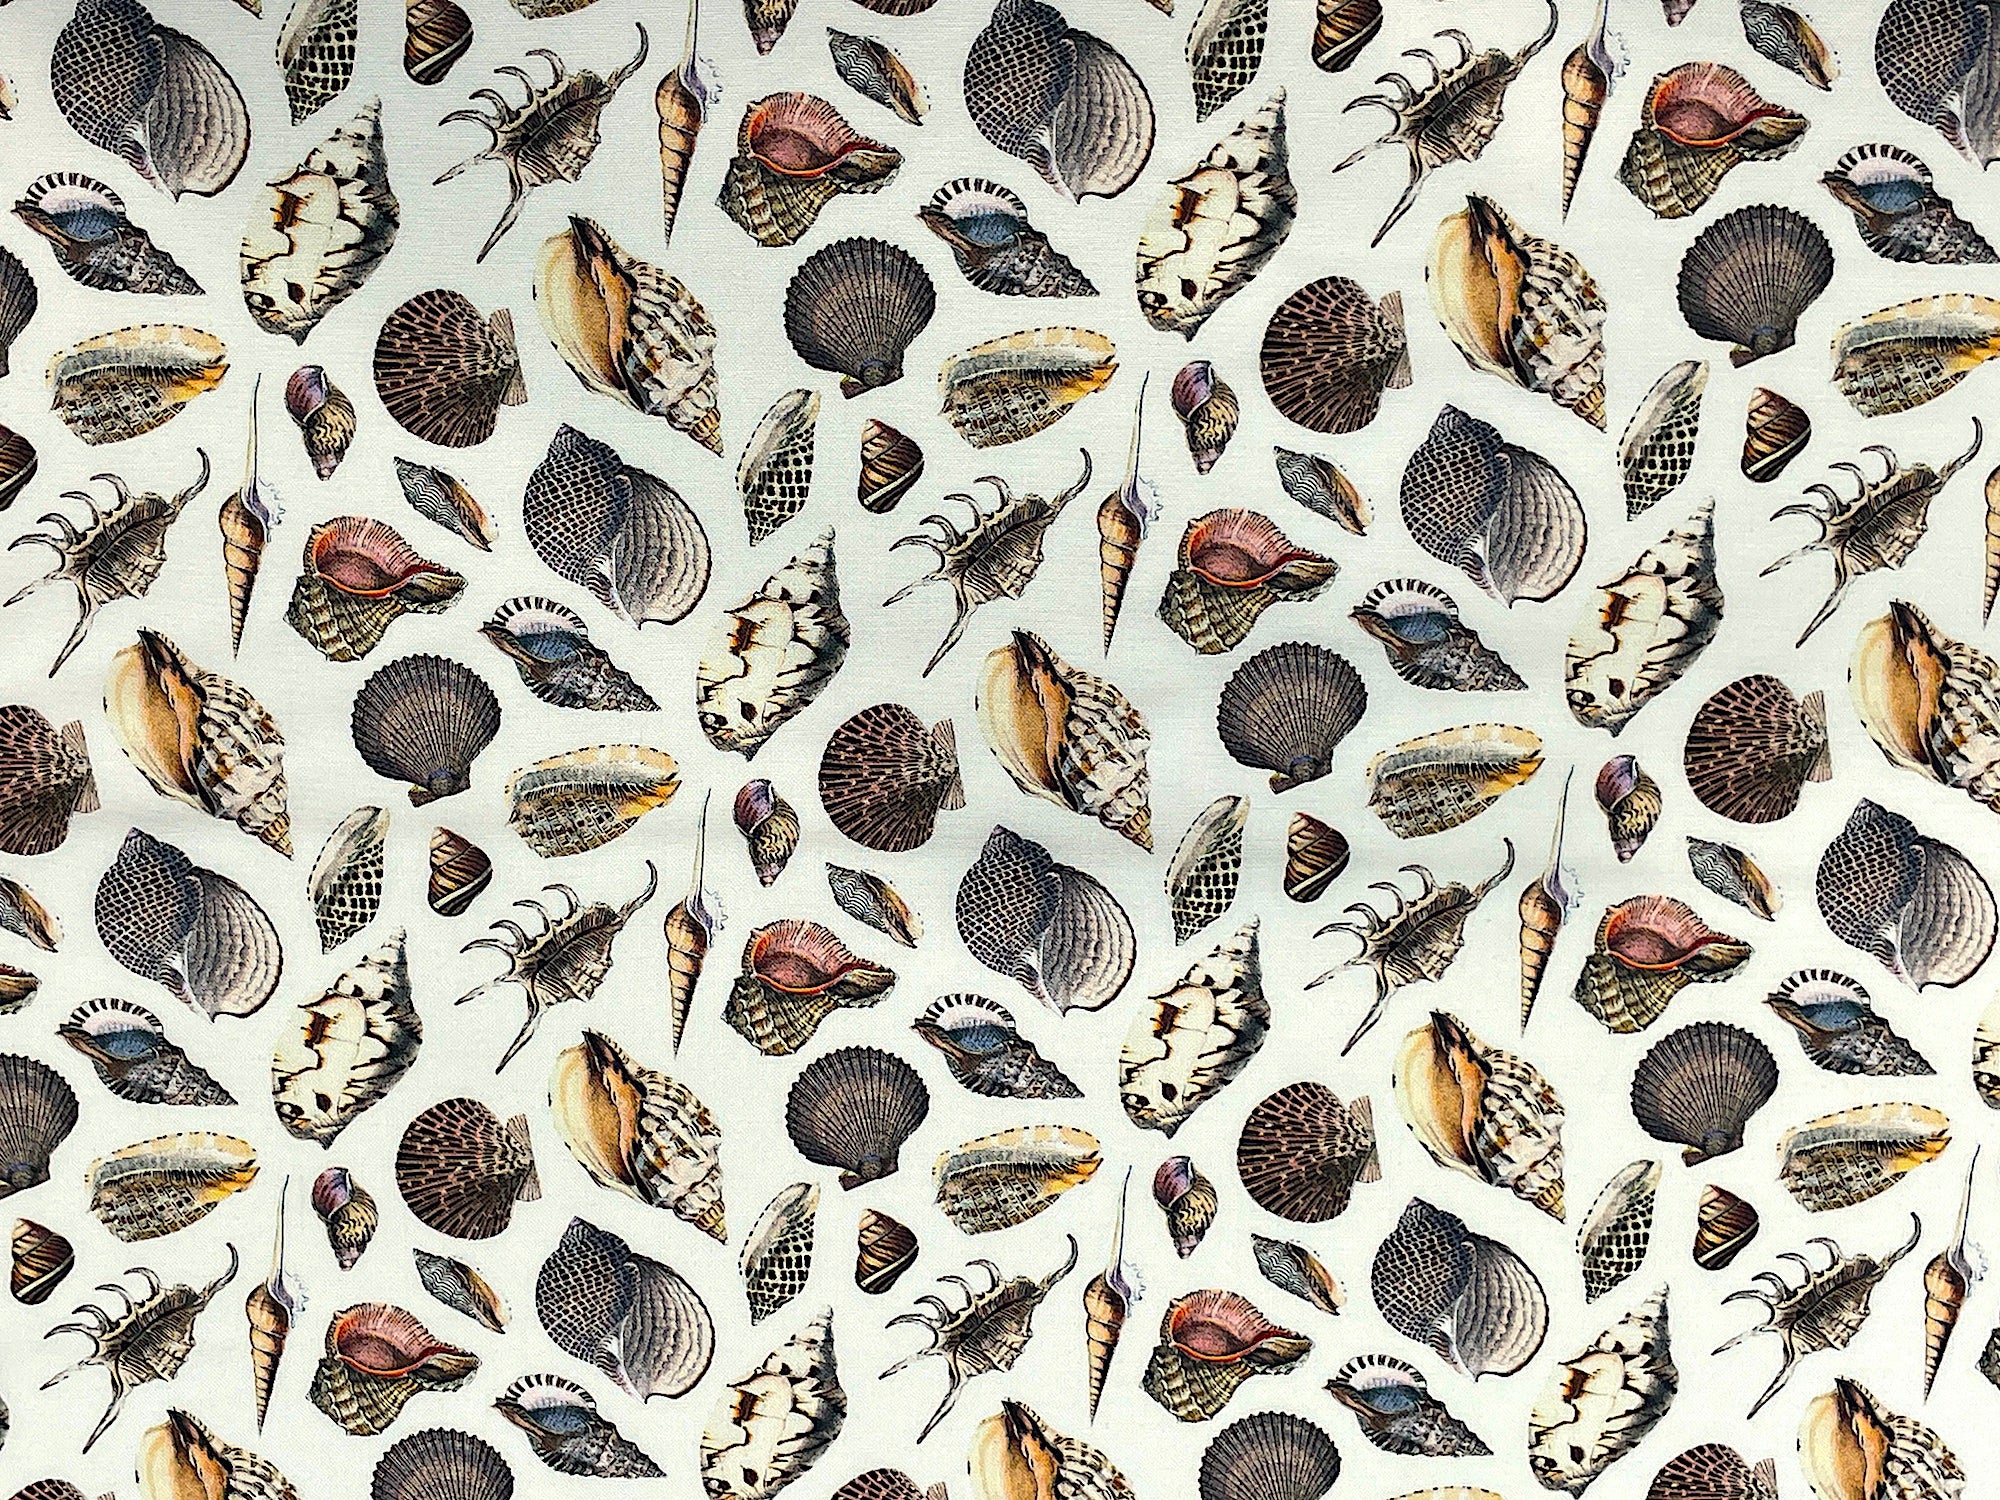 Off White cotton fabric covered with seashells in a shades of cream, beige, brown and black. 